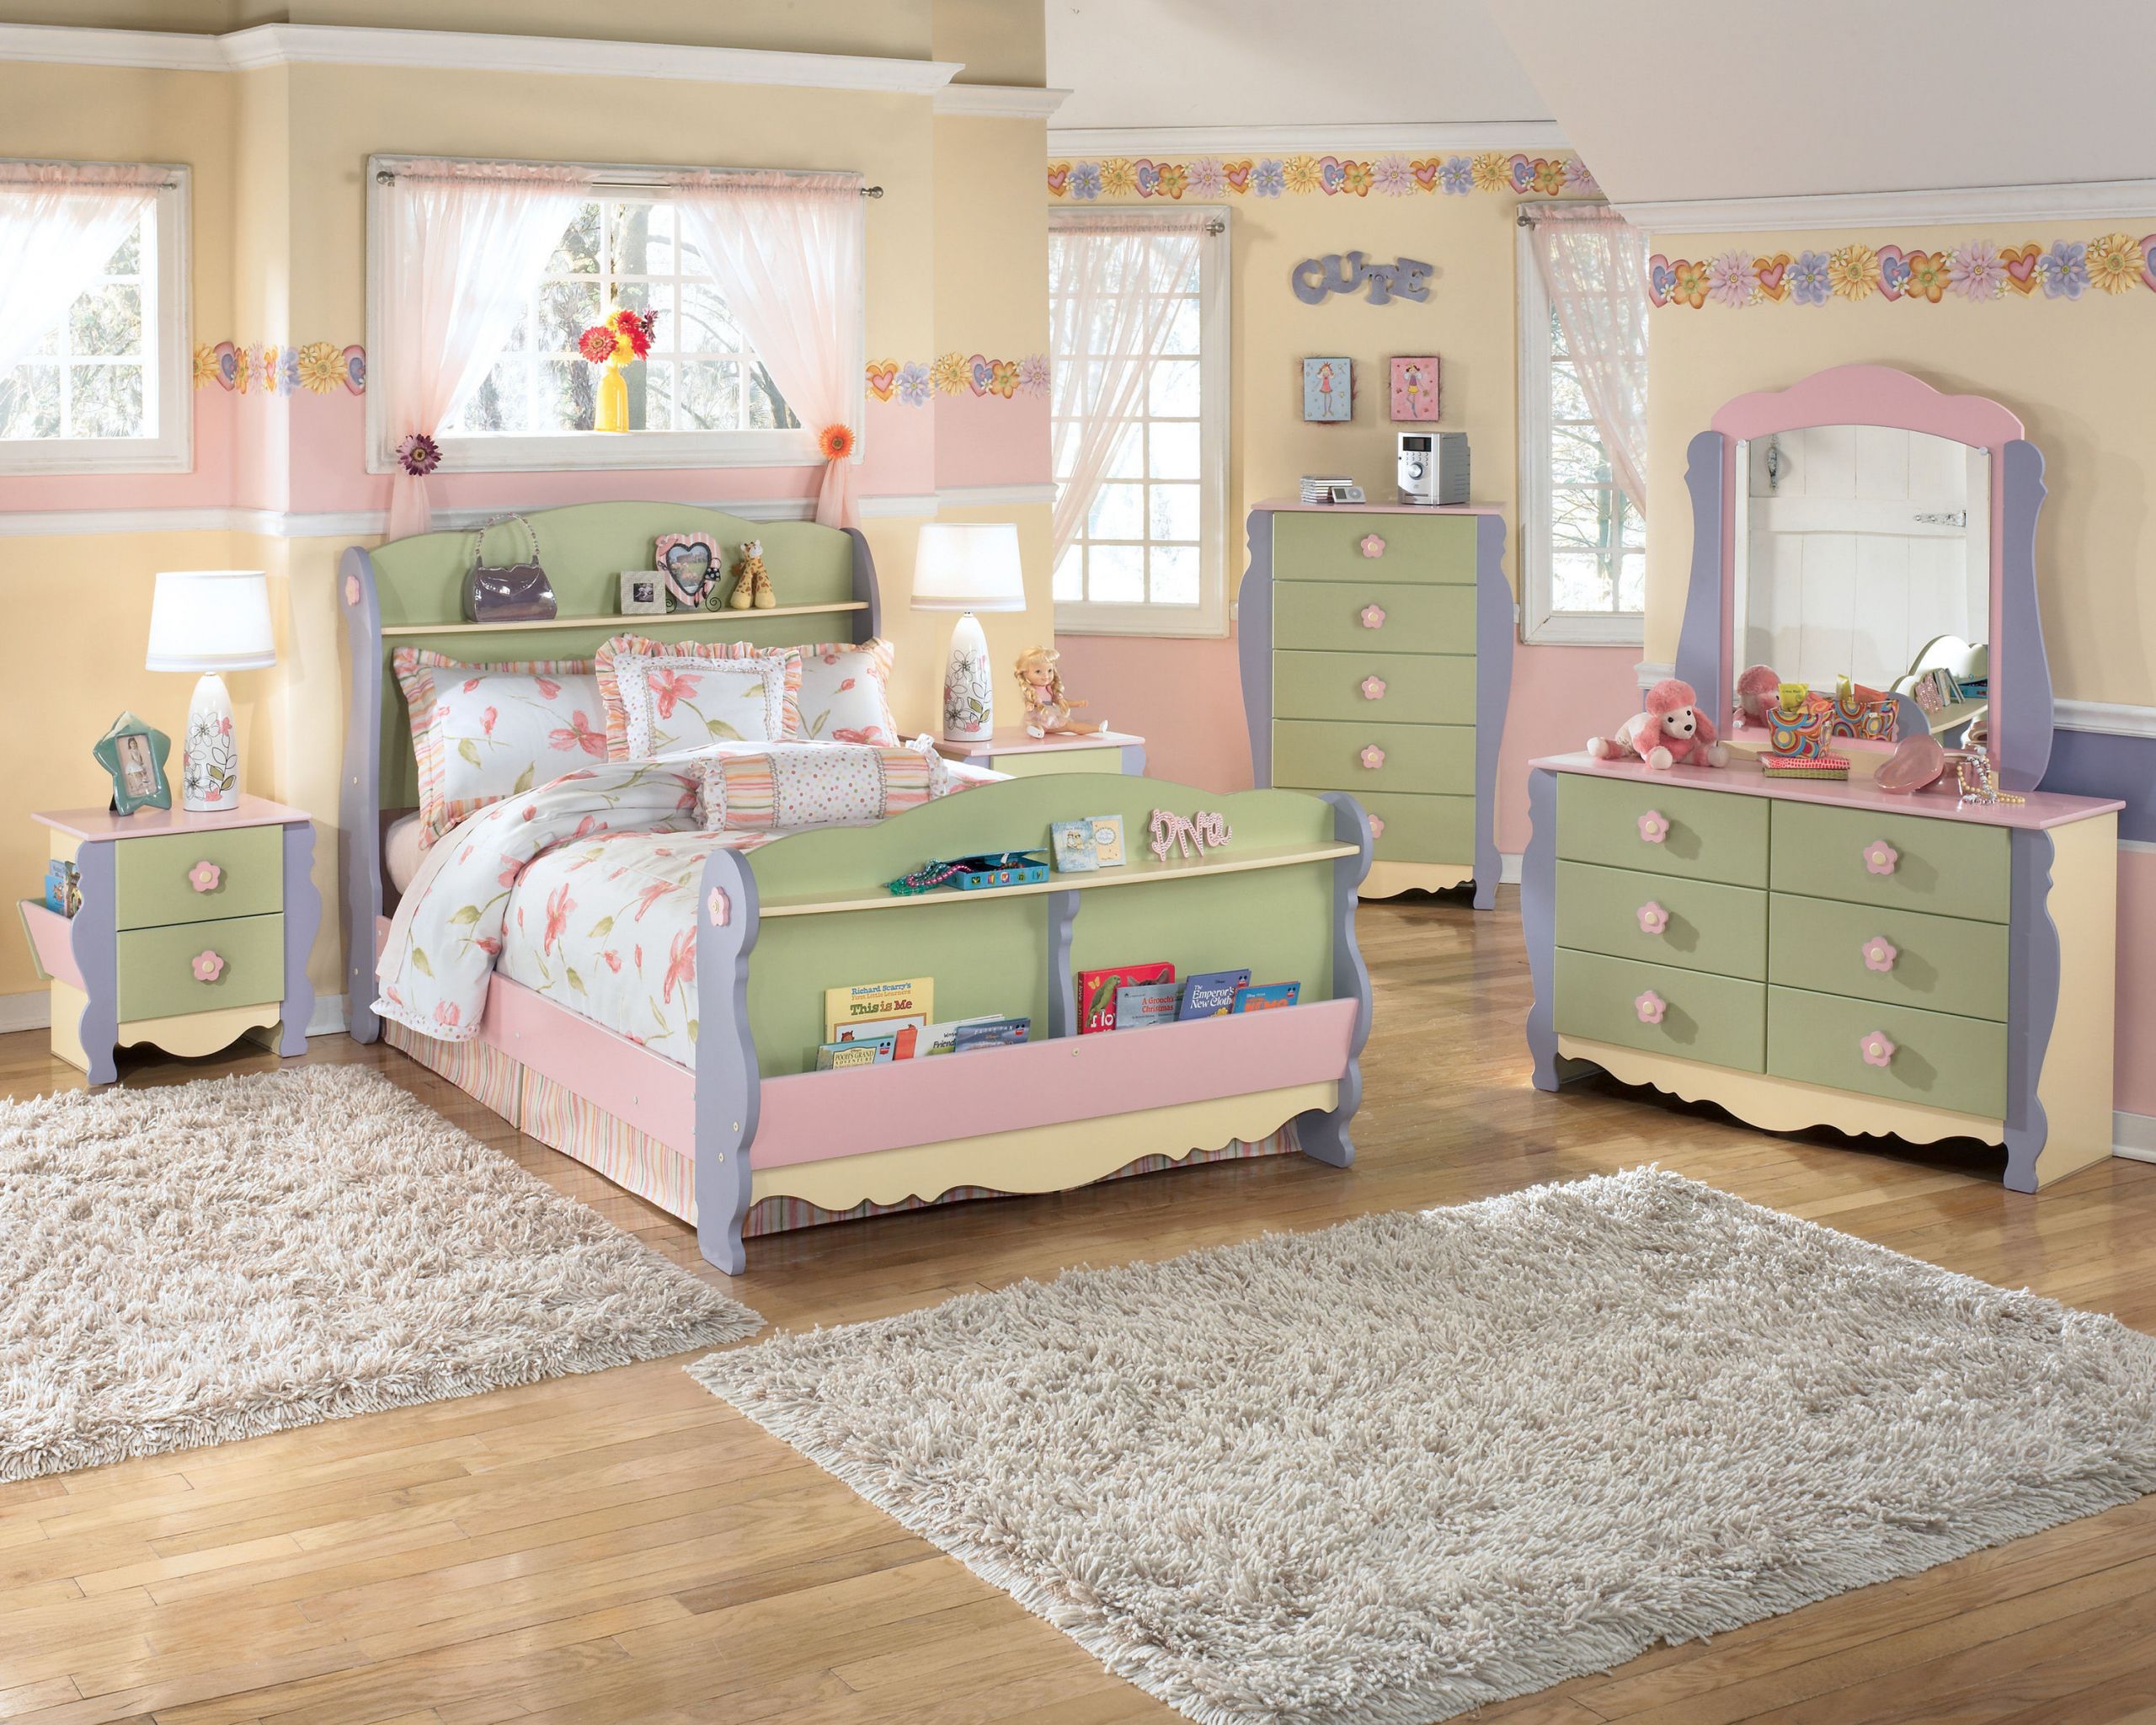 Room Set For Kids
 Doll House 4Pc Kids Bedroom Set with Twin Bed